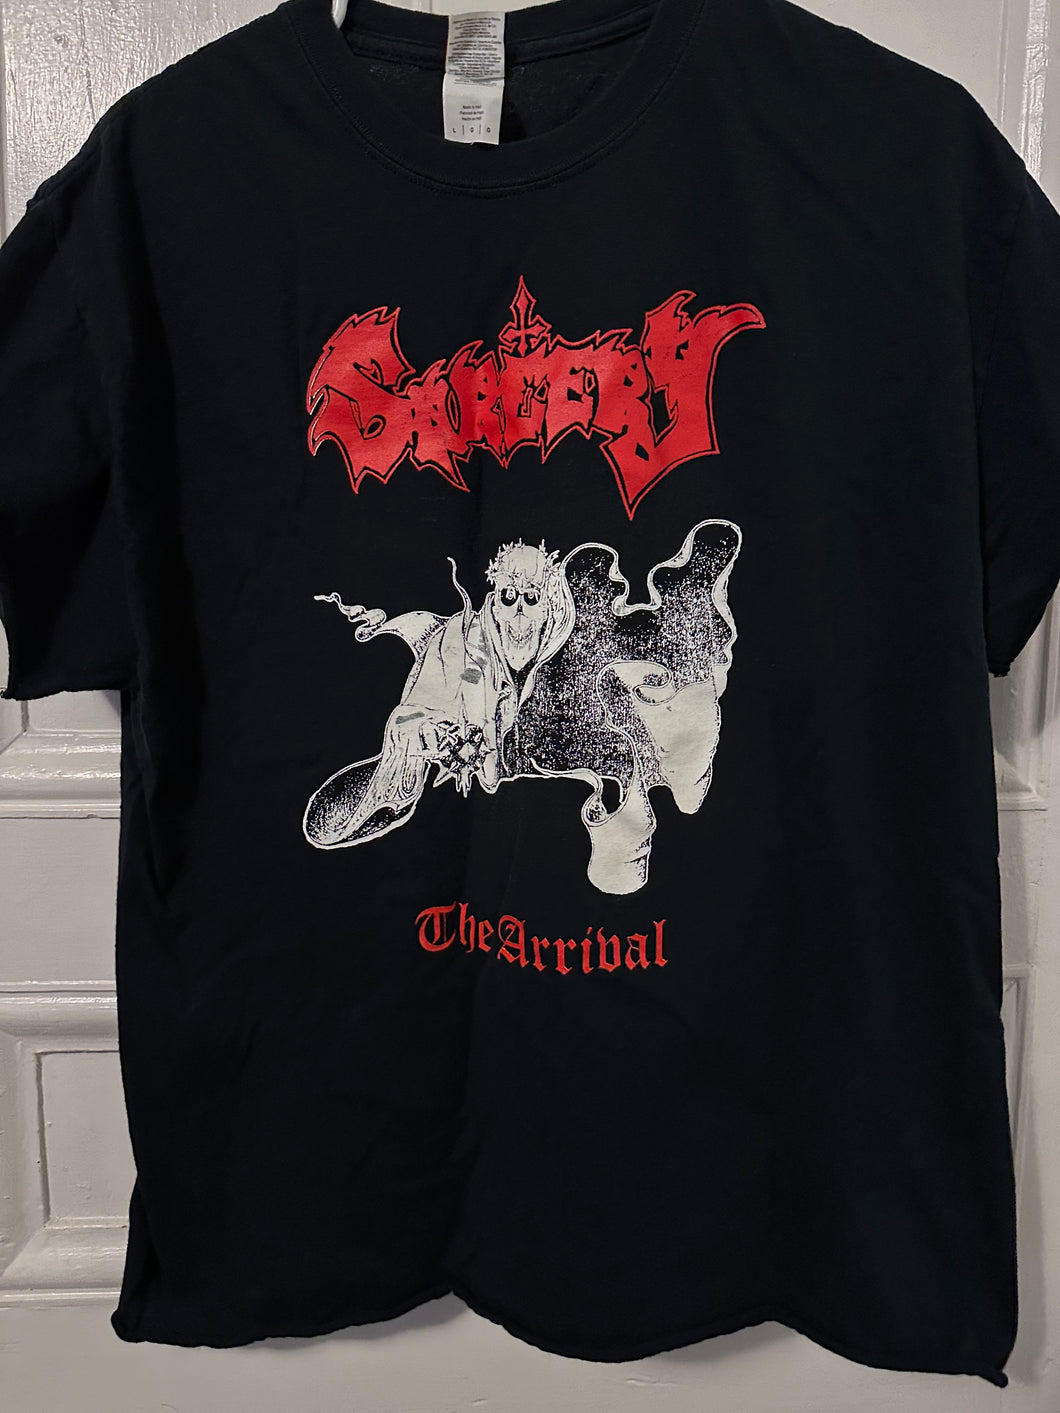 Sorcery “The Arrival” XL SS cropped